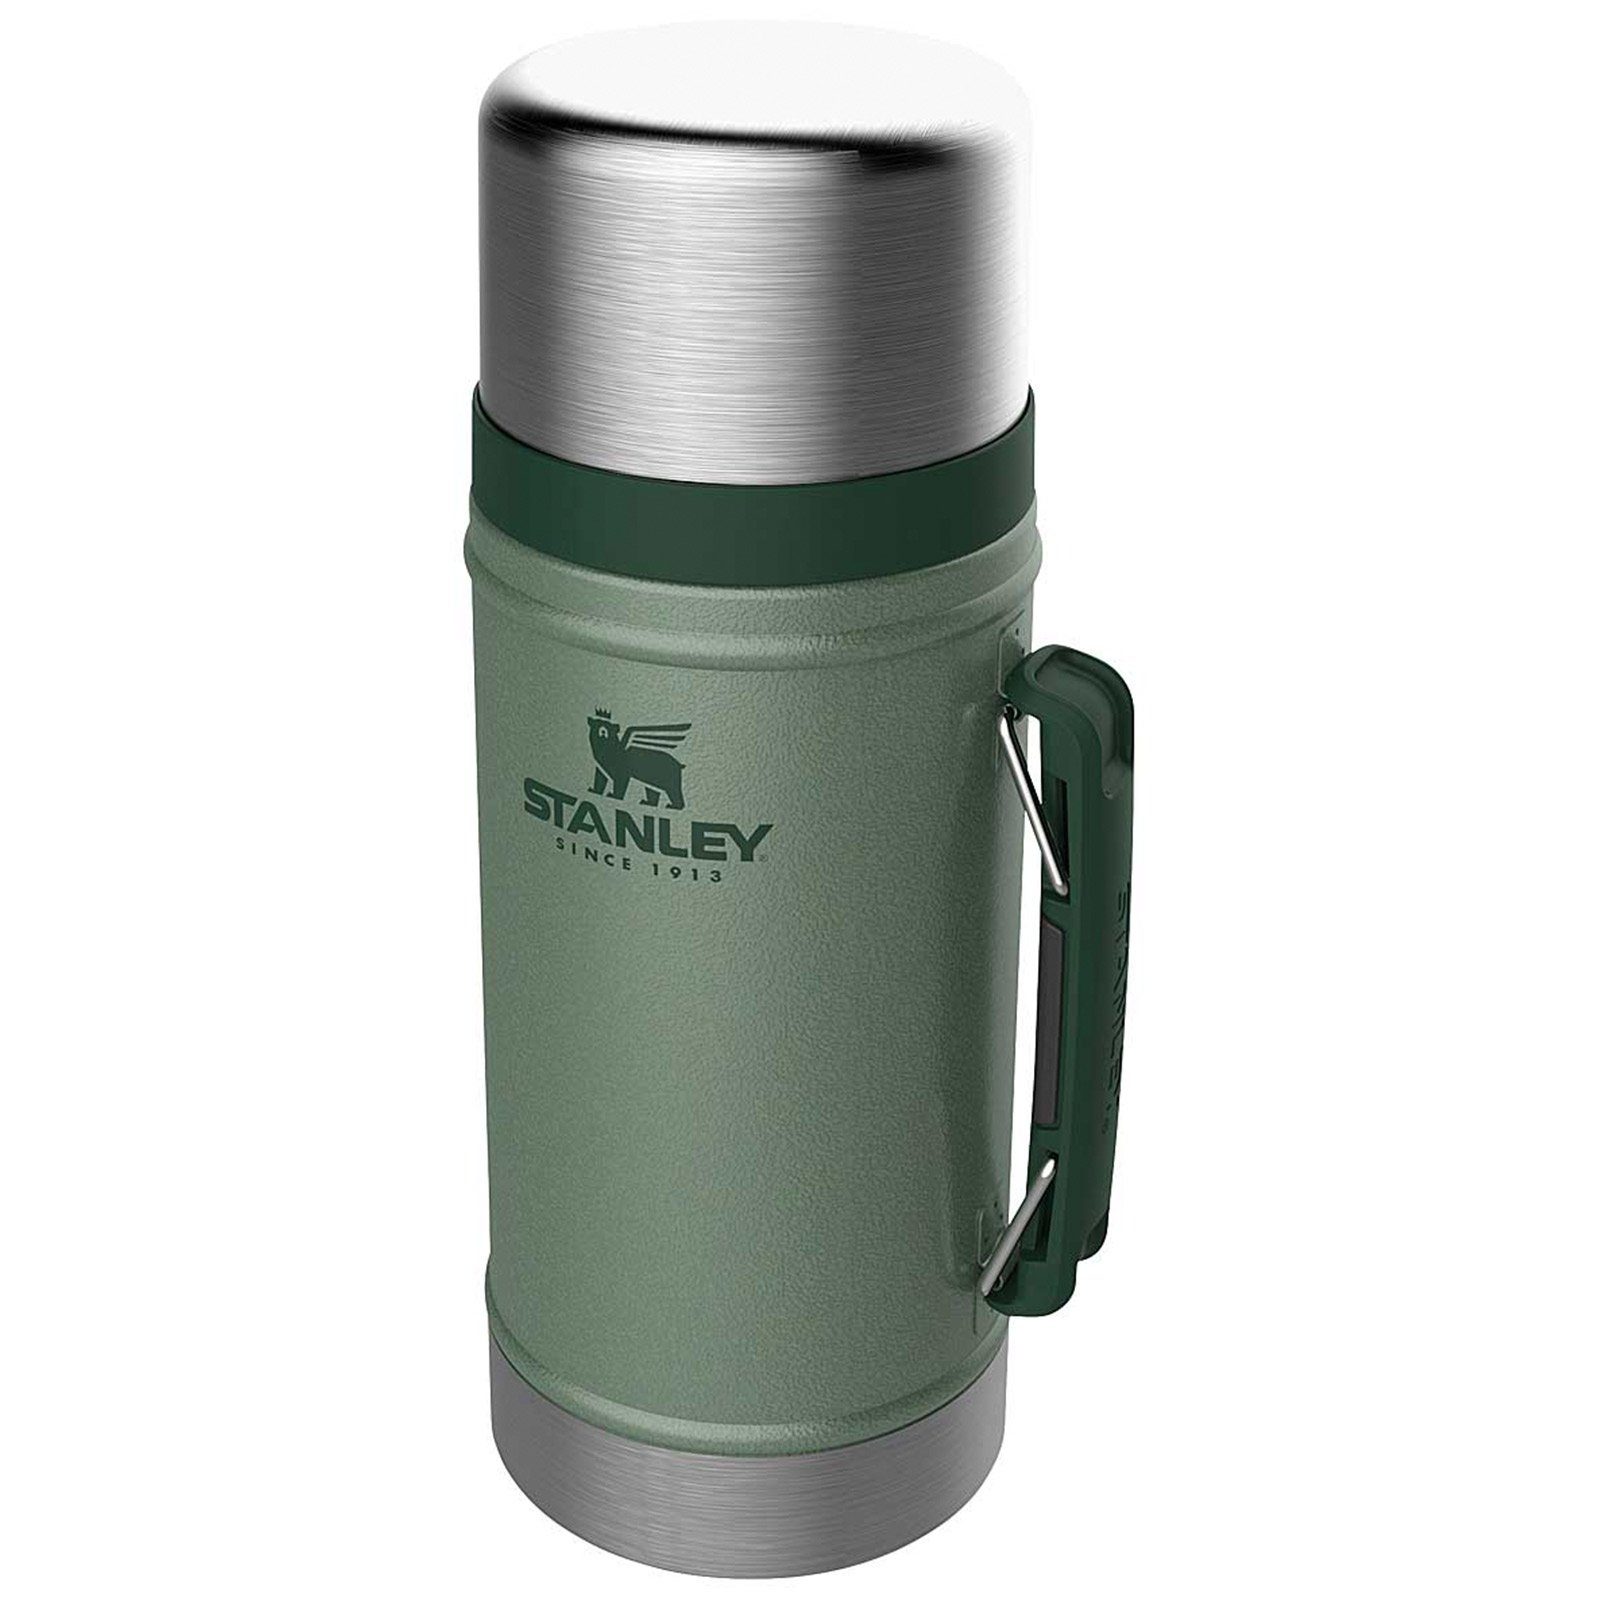 STANLEY Thermobehälter Classic Isolierbehälter Essen Thermo, Edelstahl 18/8, Food Behälter Container Griff 0,94L Grün